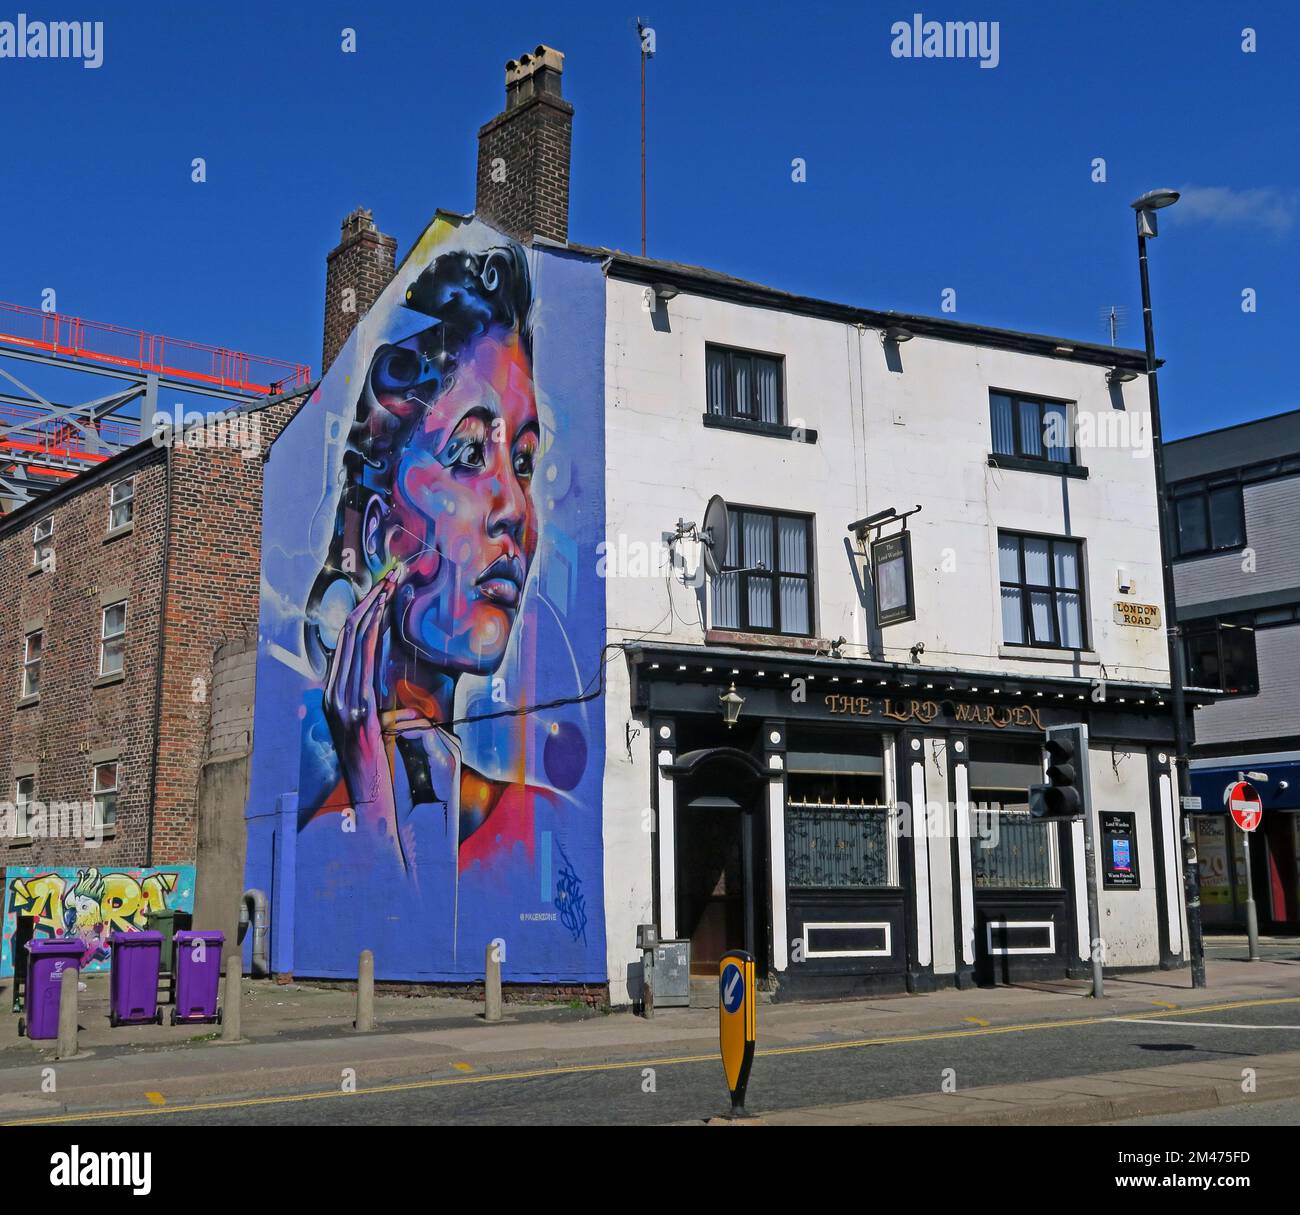 MR Cenz Street art, on Gable End, of Lord Warden, 1F London Road, Liverpool., Merseyside, Angleterre, Royaume-Uni, L3 8HR Banque D'Images